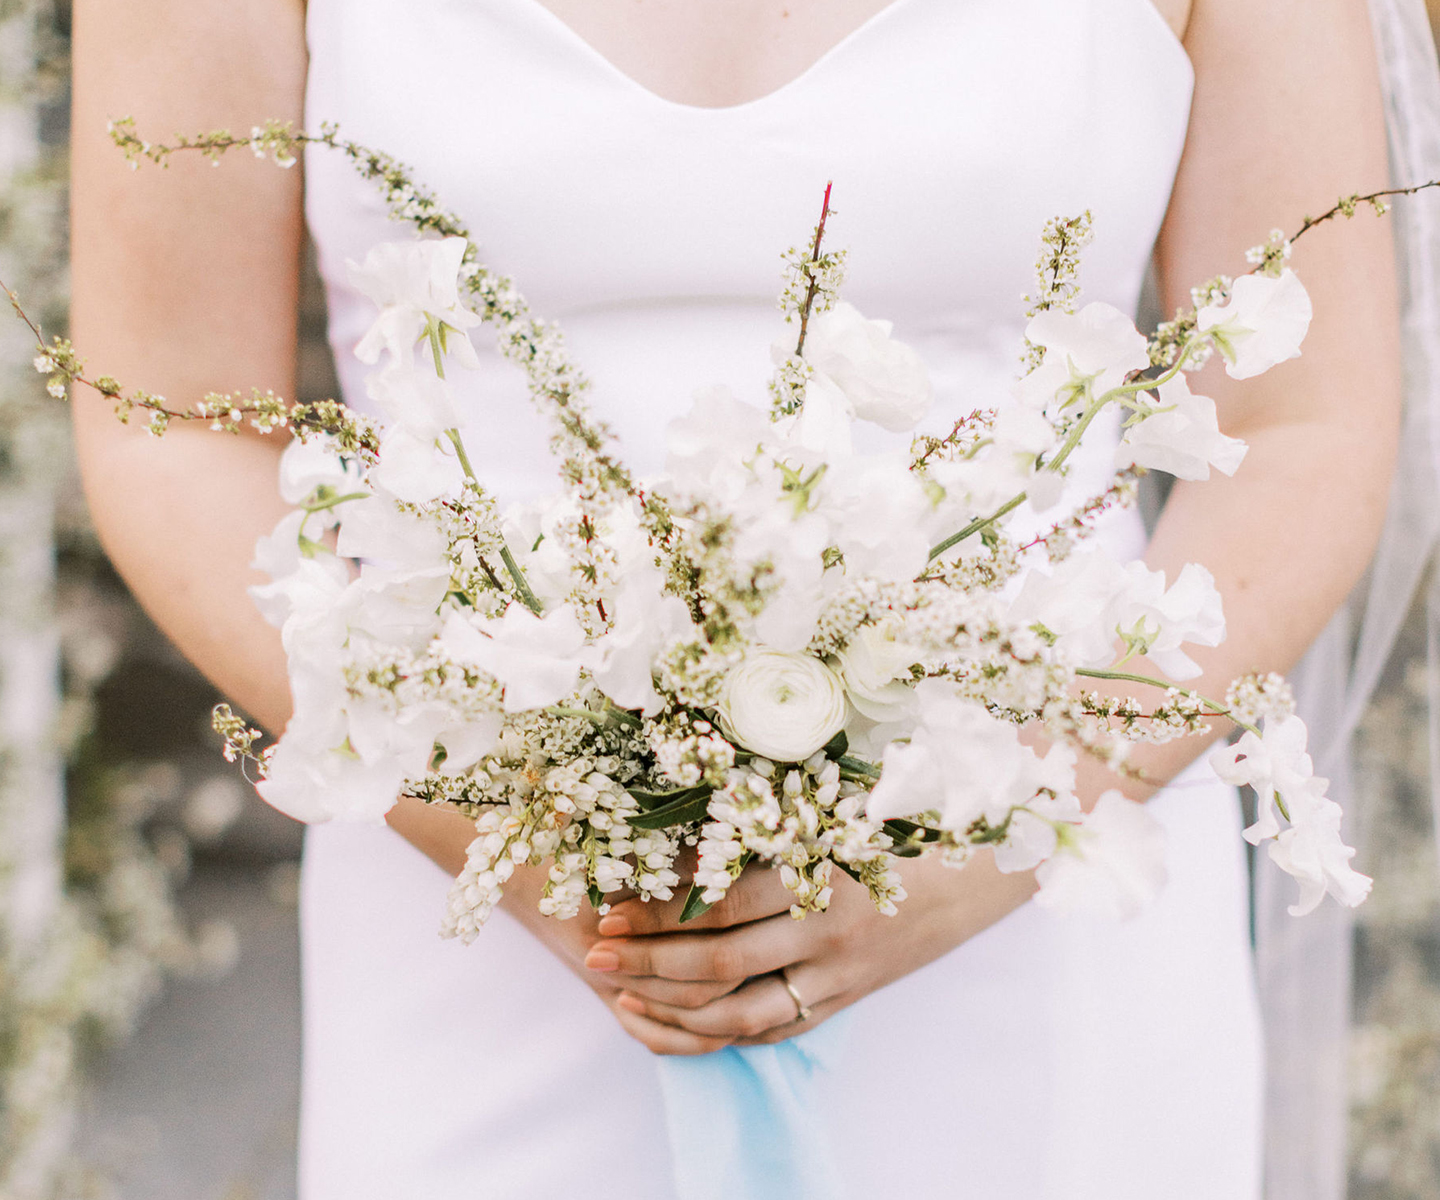 White wedding bouquet inspiration with sweet peas